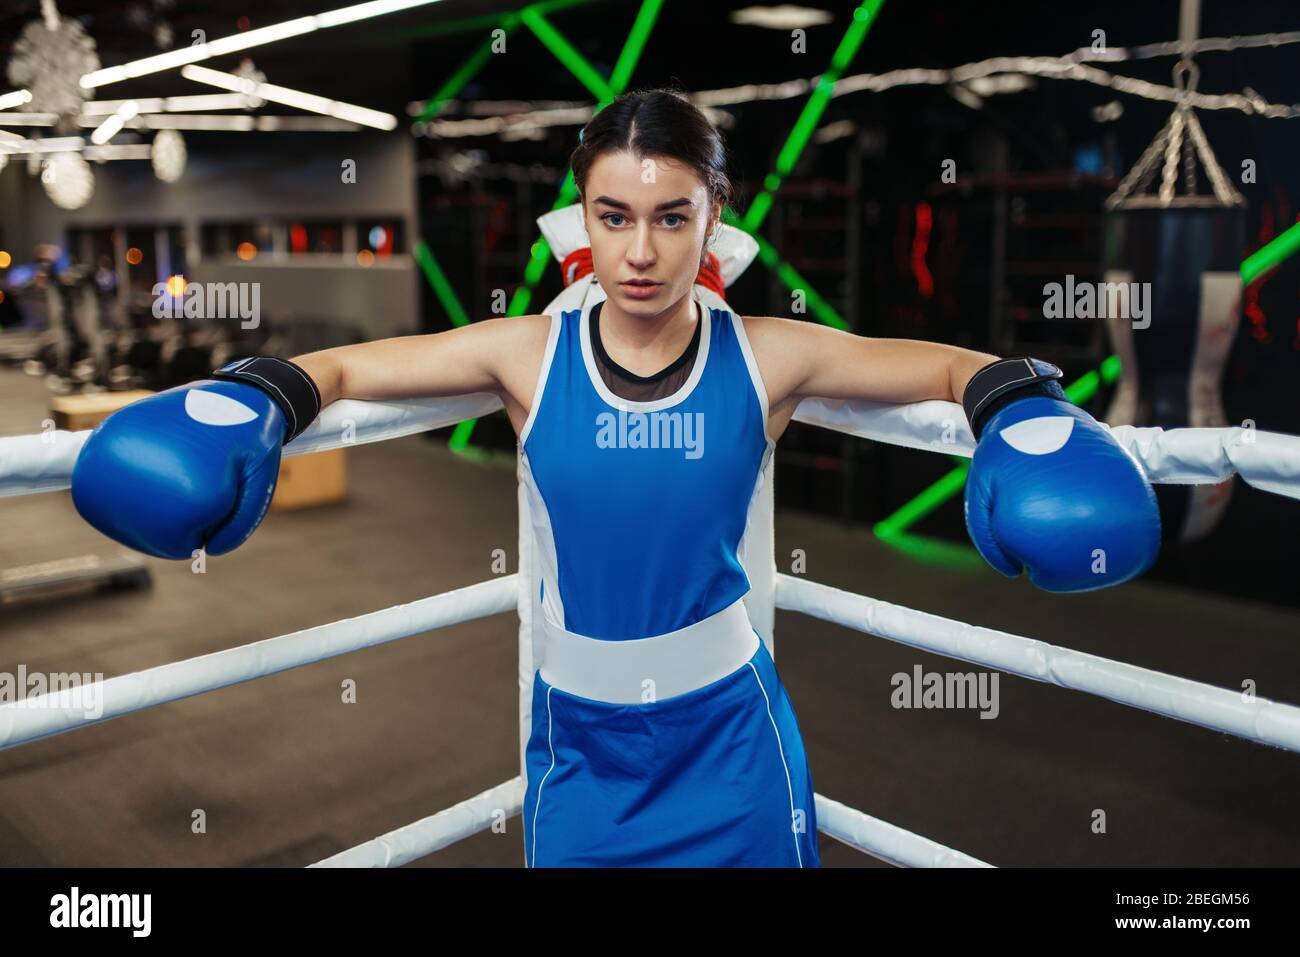 Woman in blue gloves in the corner of boxing ring Stock Photo